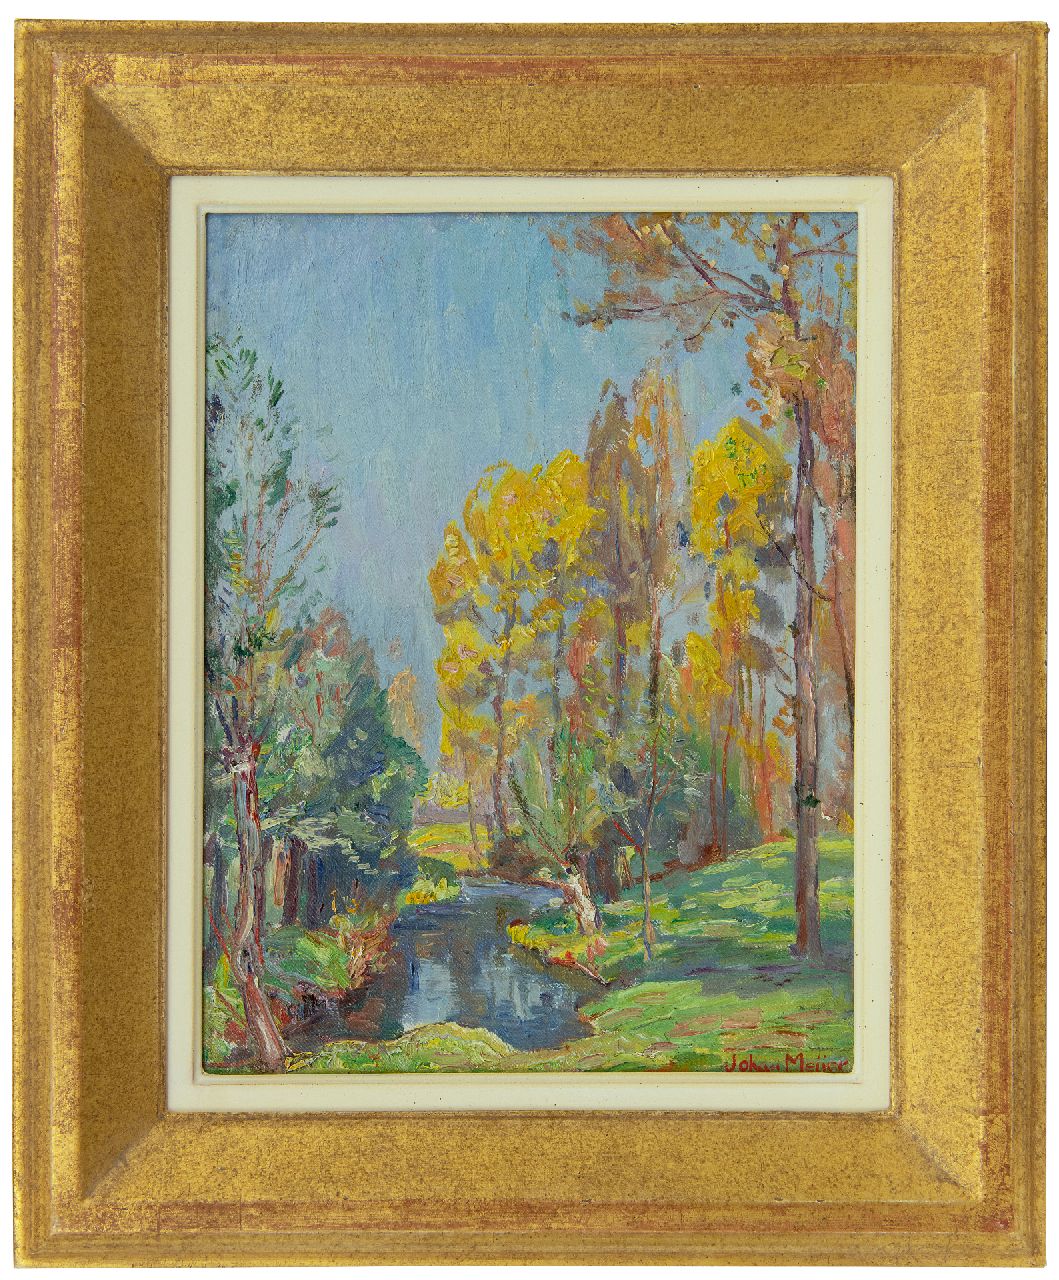 Meijer J.  | Johannes 'Johan' Meijer, Sunny autumnal forest, oil on canvas laid down on board 29.1 x 22.3 cm, signed l.r.